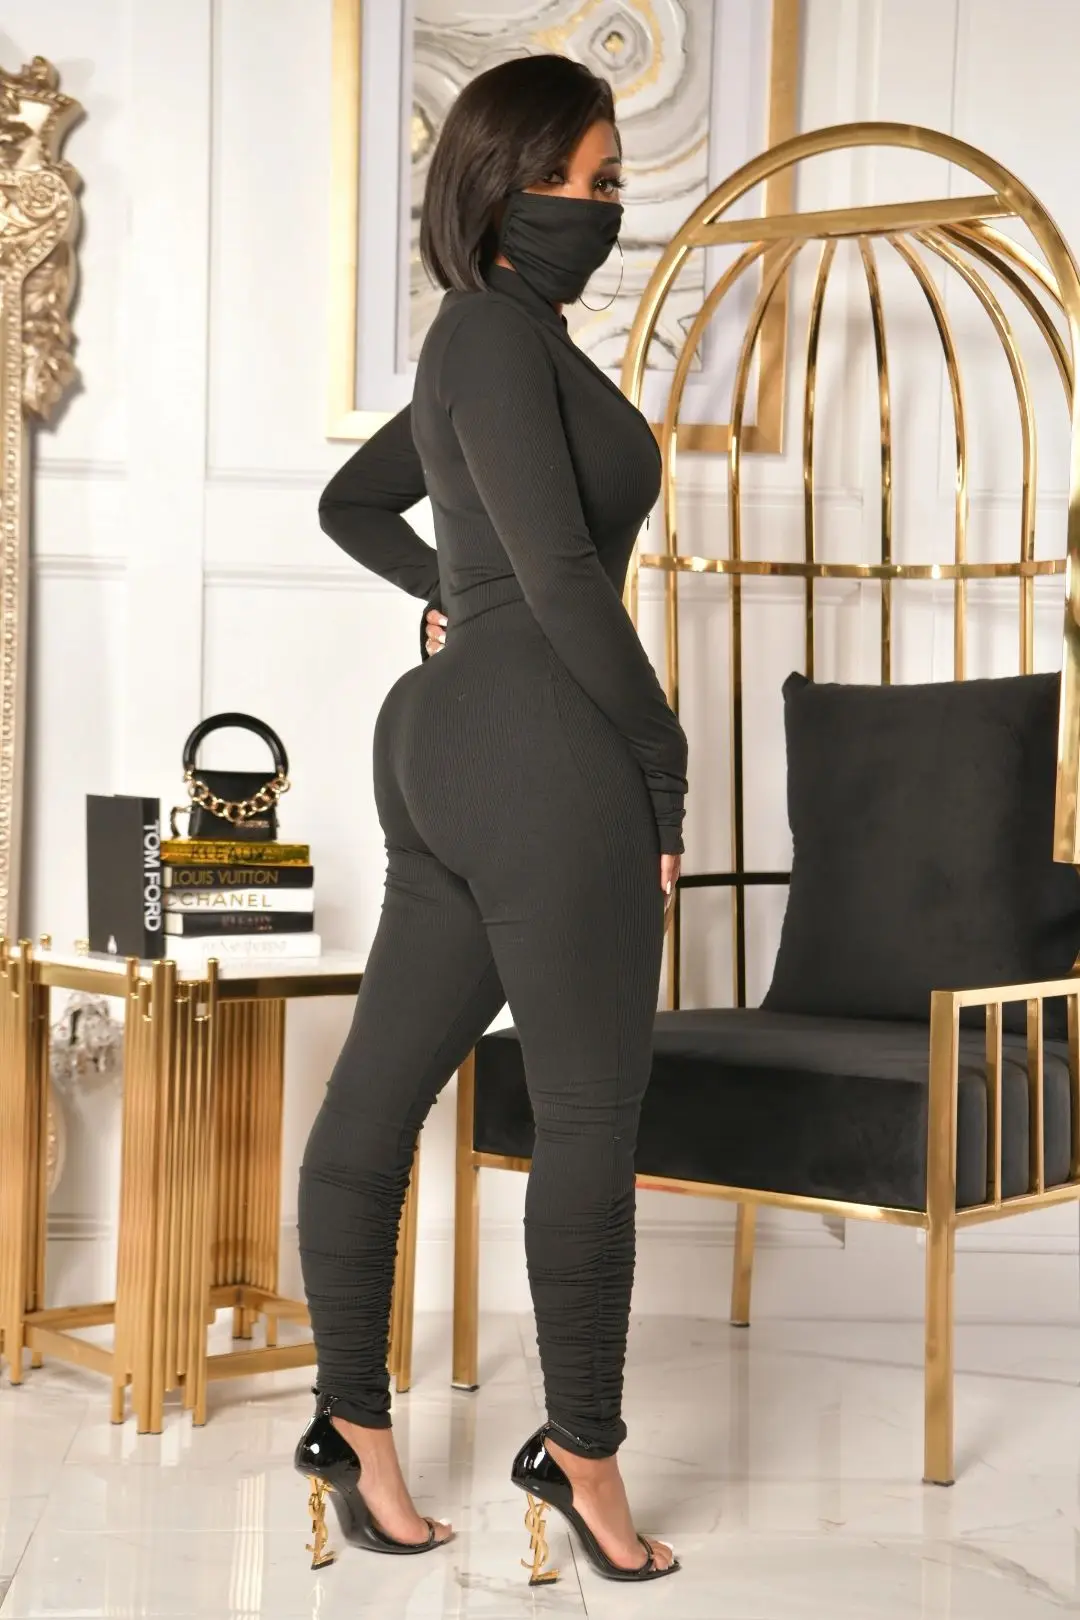 C119-1 amazon hot sell one piece jumpsuits long sleeve jumpsuit women's sports fitness yoga set fall 2021 women clothes